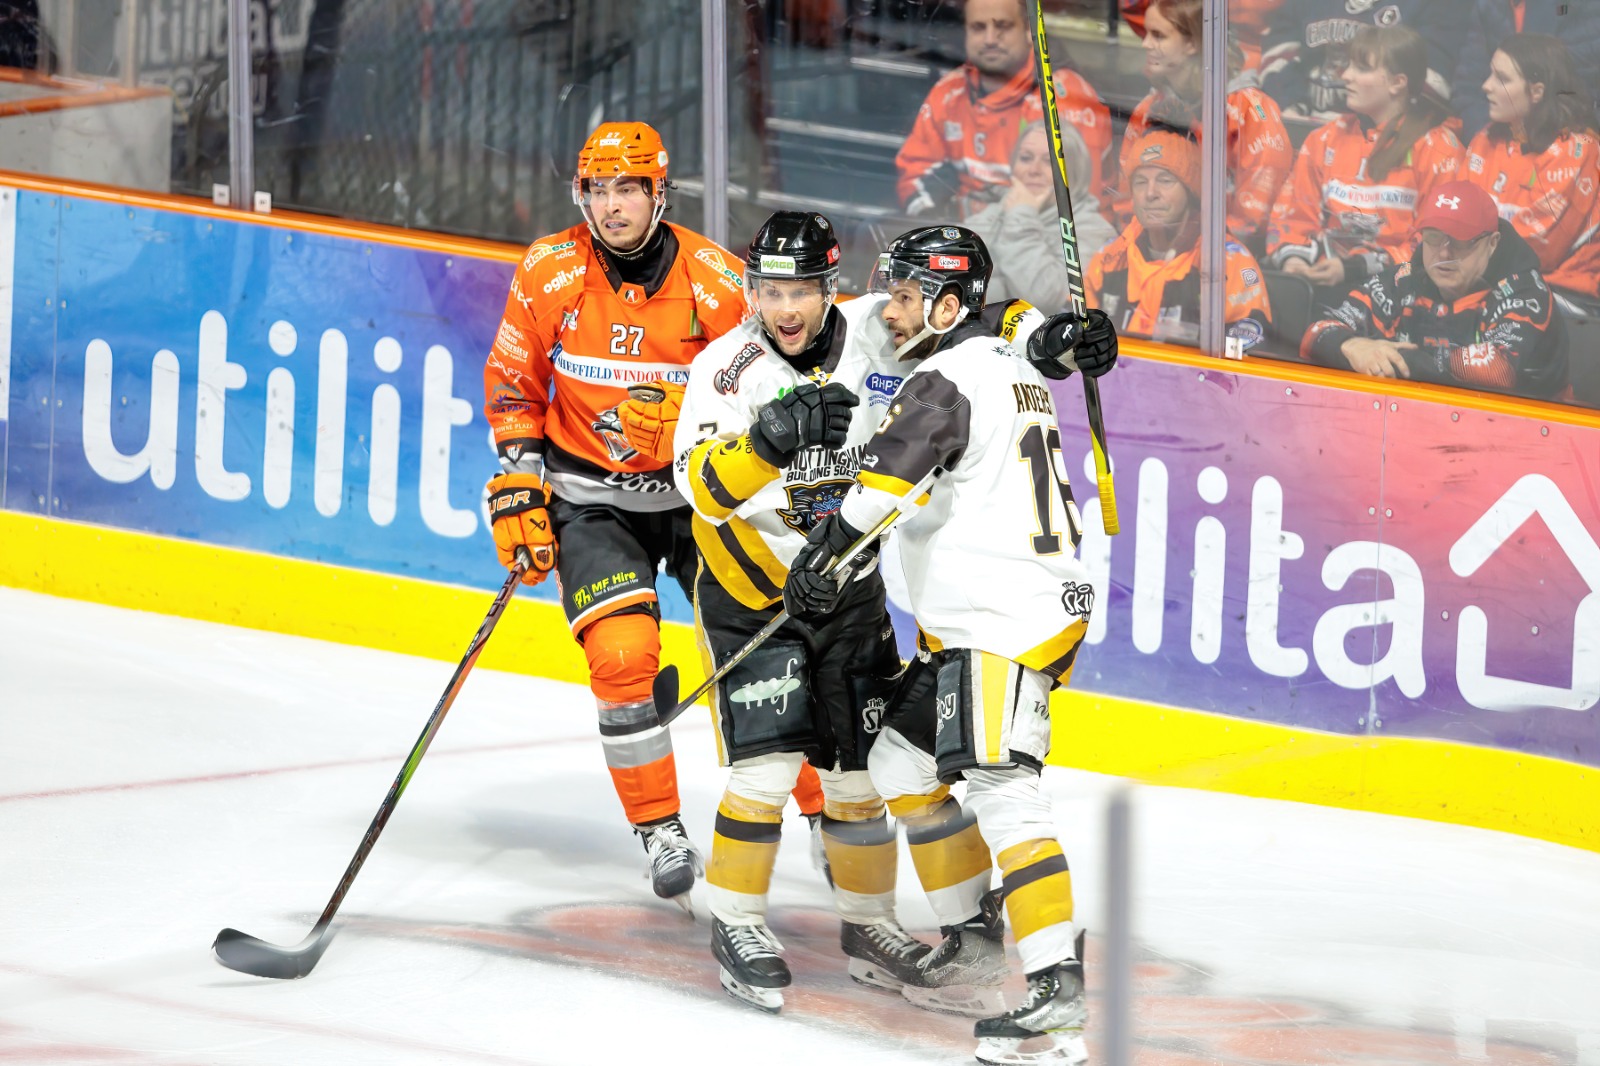 STEELERS NEXT AT HOME ON SATURDAY FOR THE PANTHERS Top Image